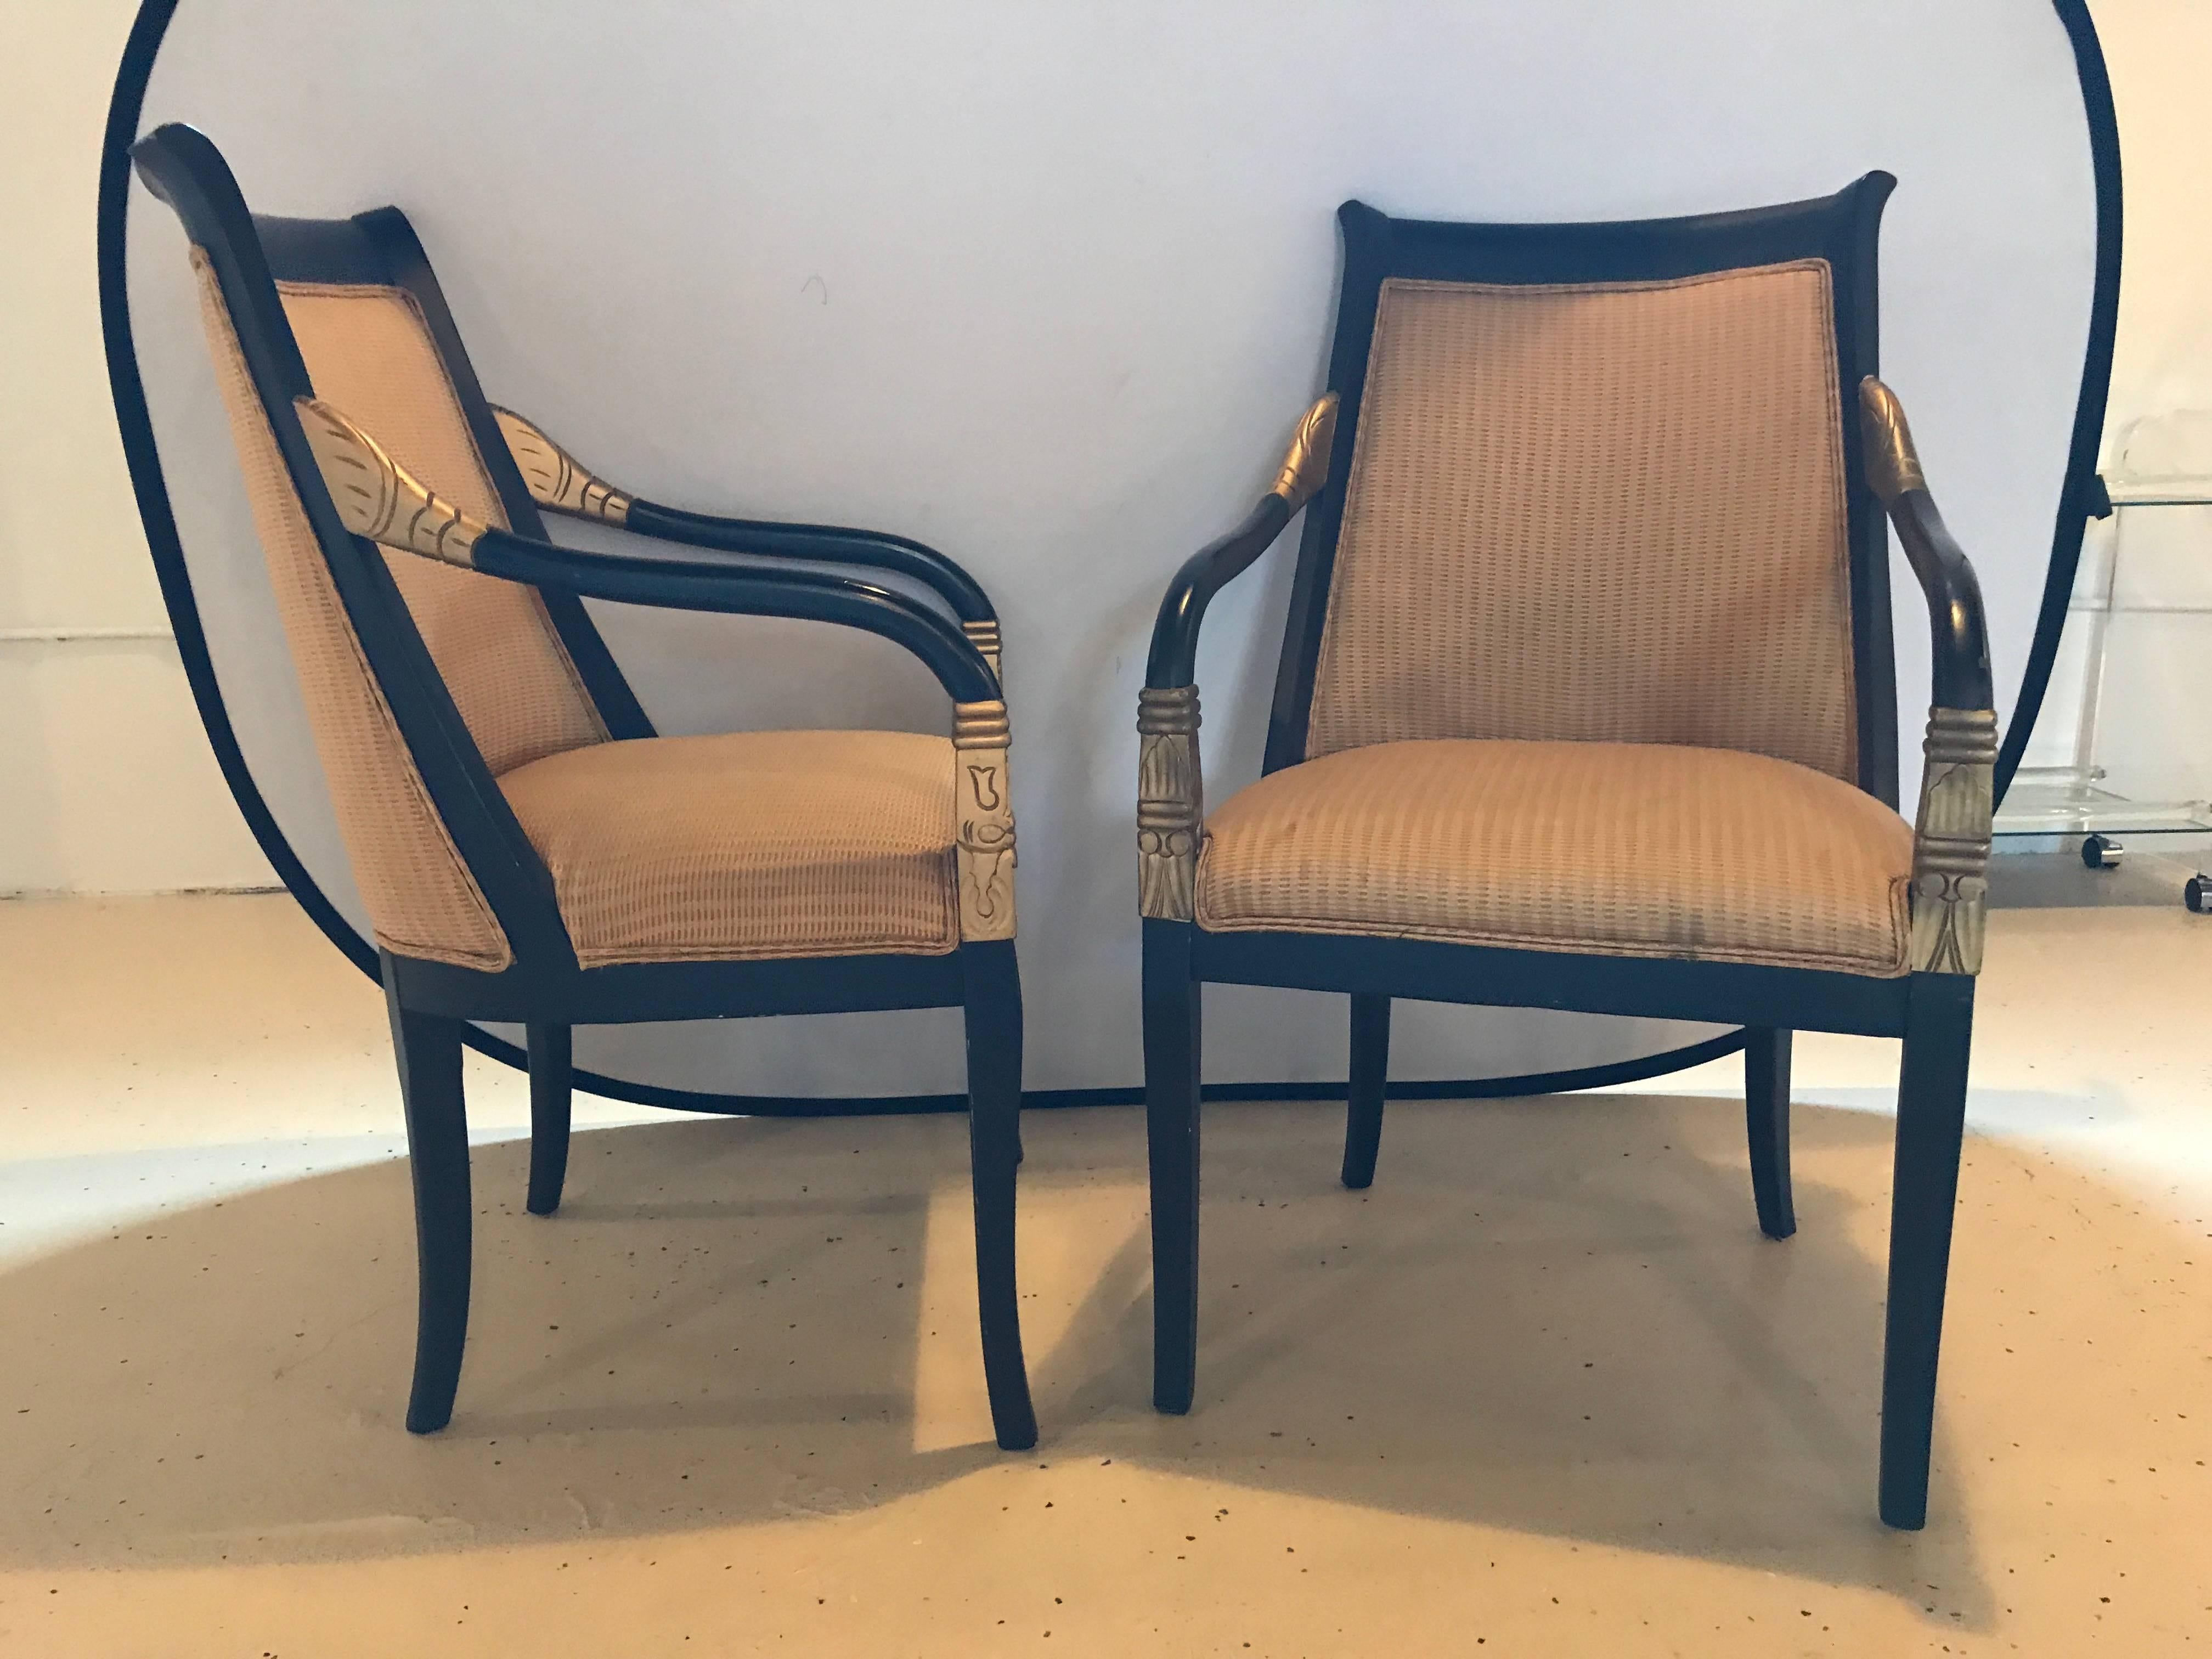 A pair of Grosfeld House armchairs ebony and gilt decorated. Each on curved tapering legs supporting a padded seat with gilt decorated hand and upper arm rests. These sleek and stylish arm chairs or fauteuils would make a lovely addition to any